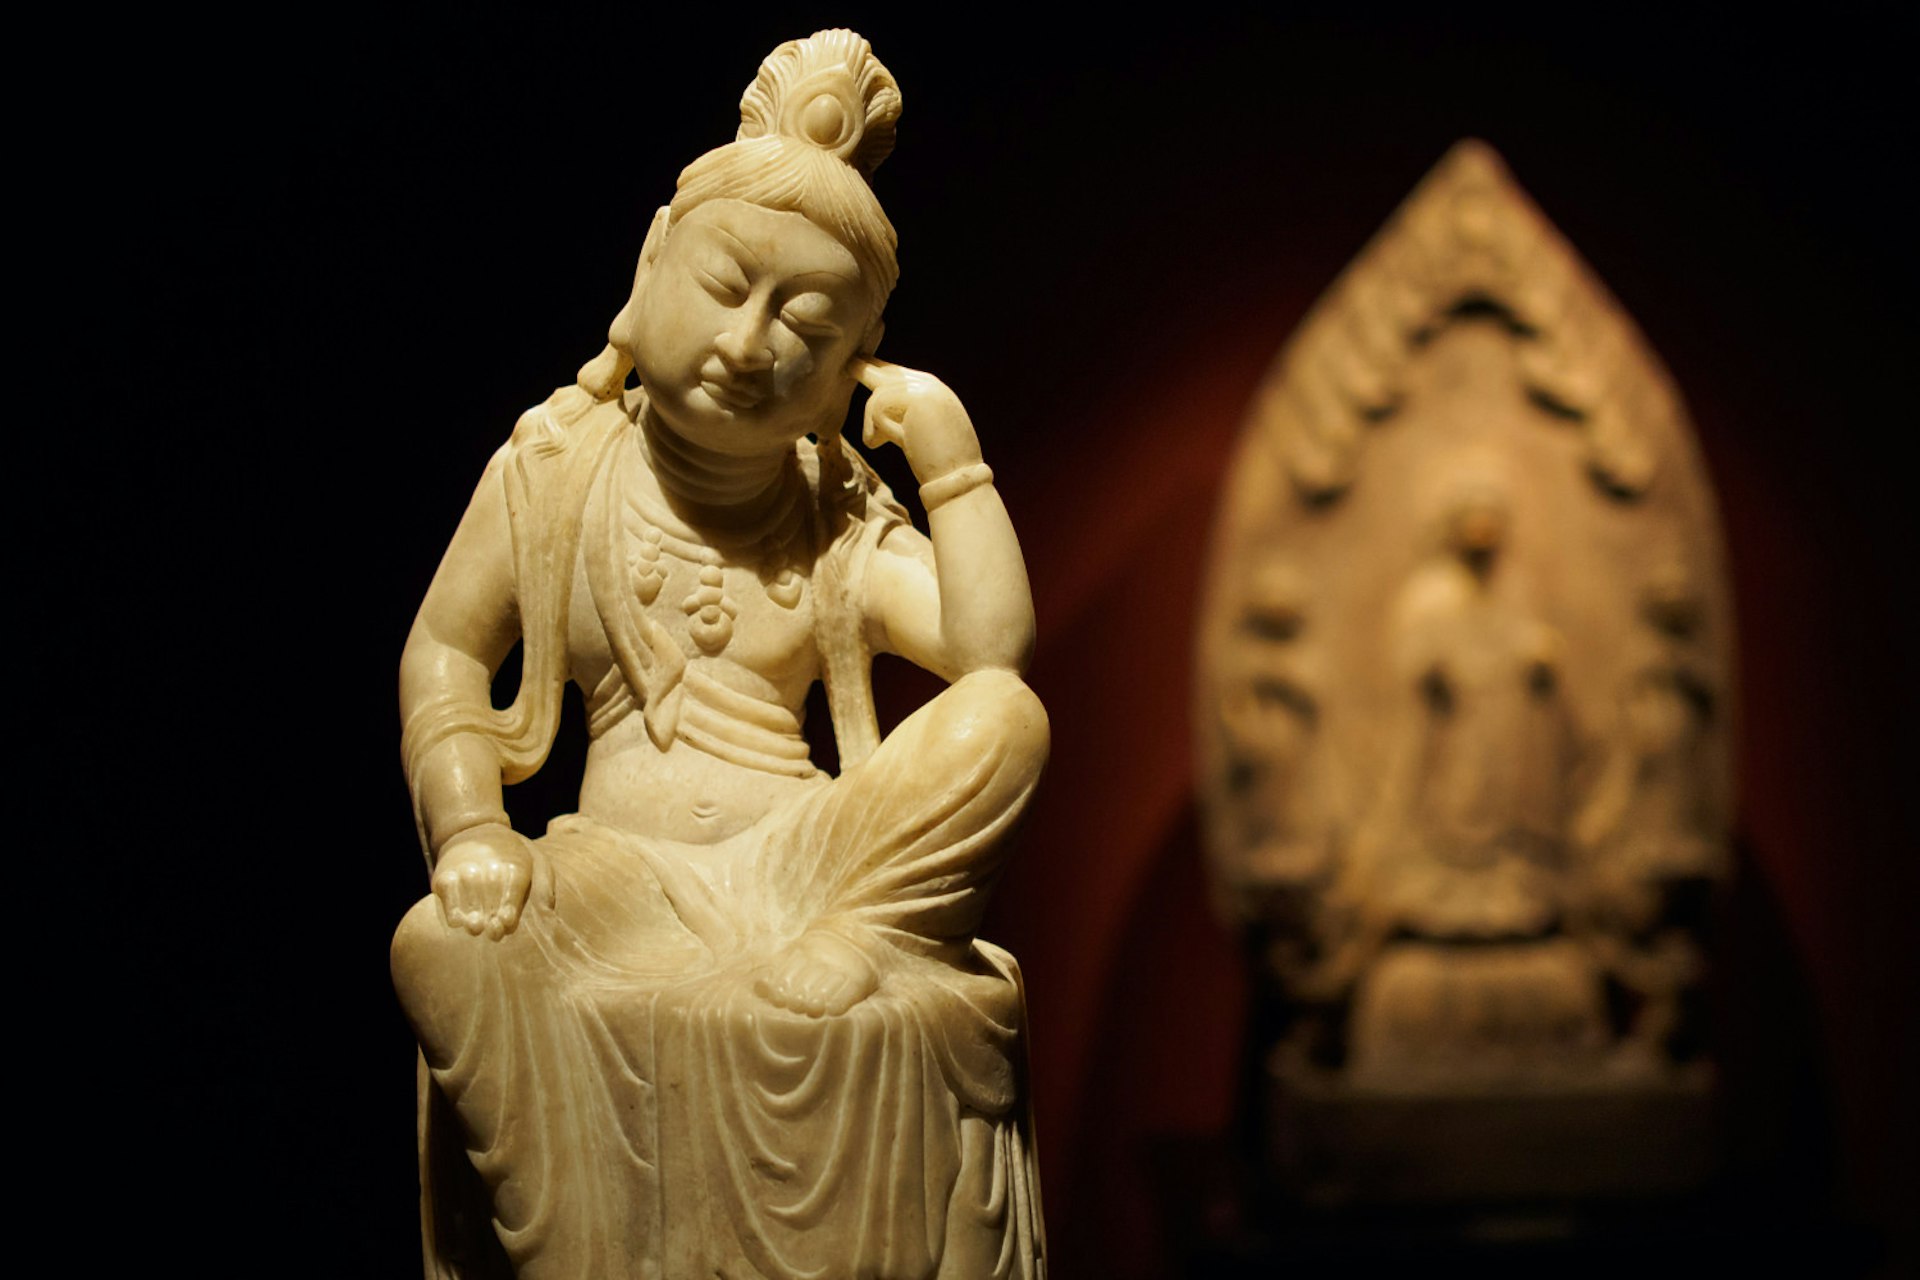 Exquisite Buddhist sculptures on display at the Poly Art Museum © Tom O'Malley / Lonely Planet